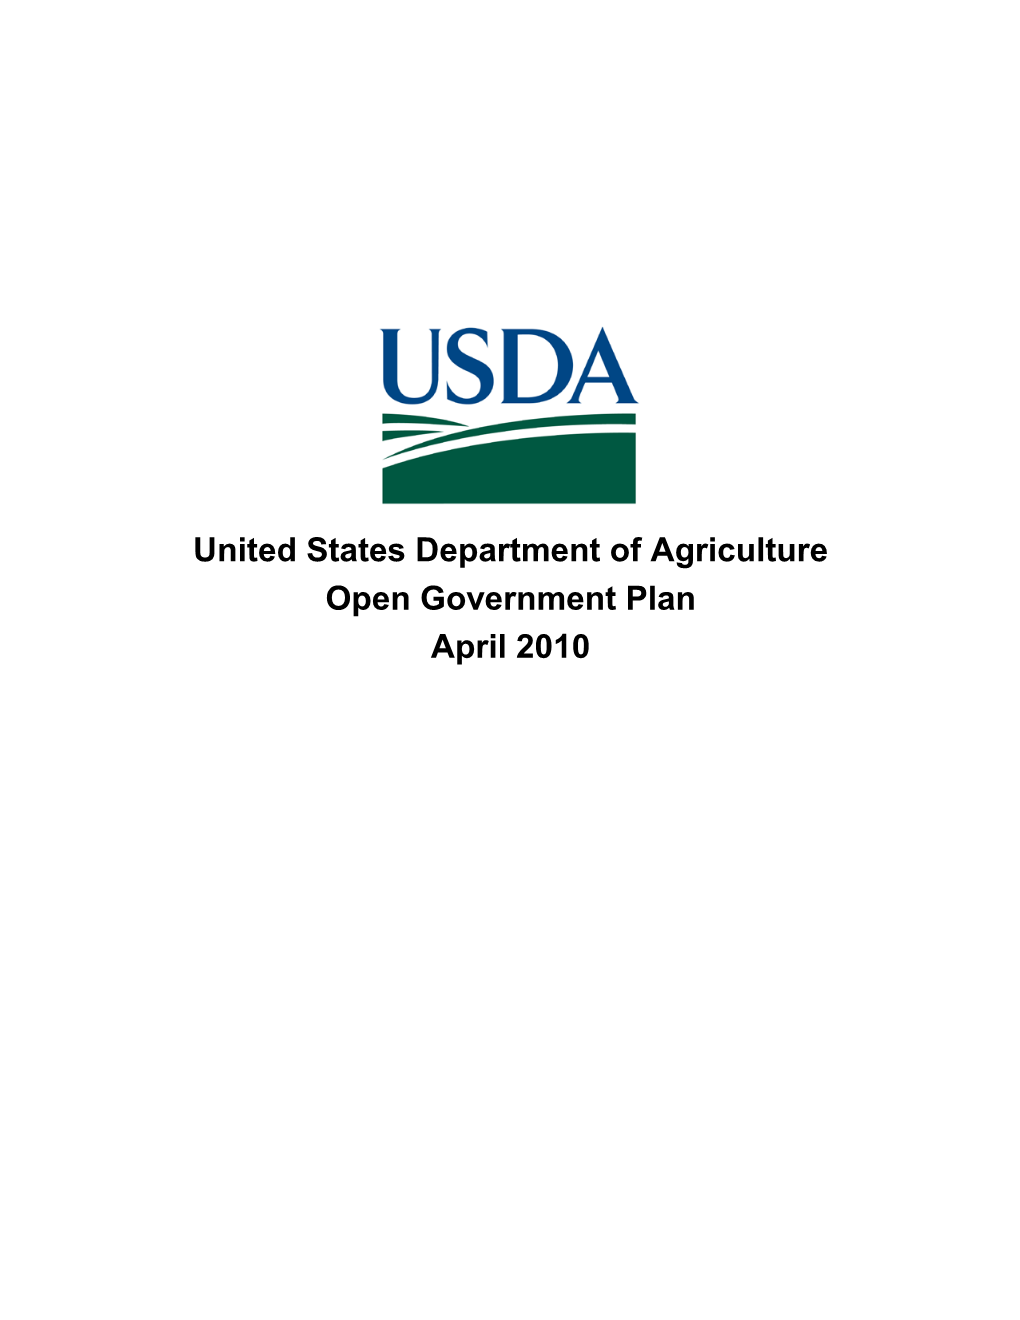 USDA Open Government Plan Represents the Department’S Response to Office of Management and Budget (OMB) Directive M-10-06